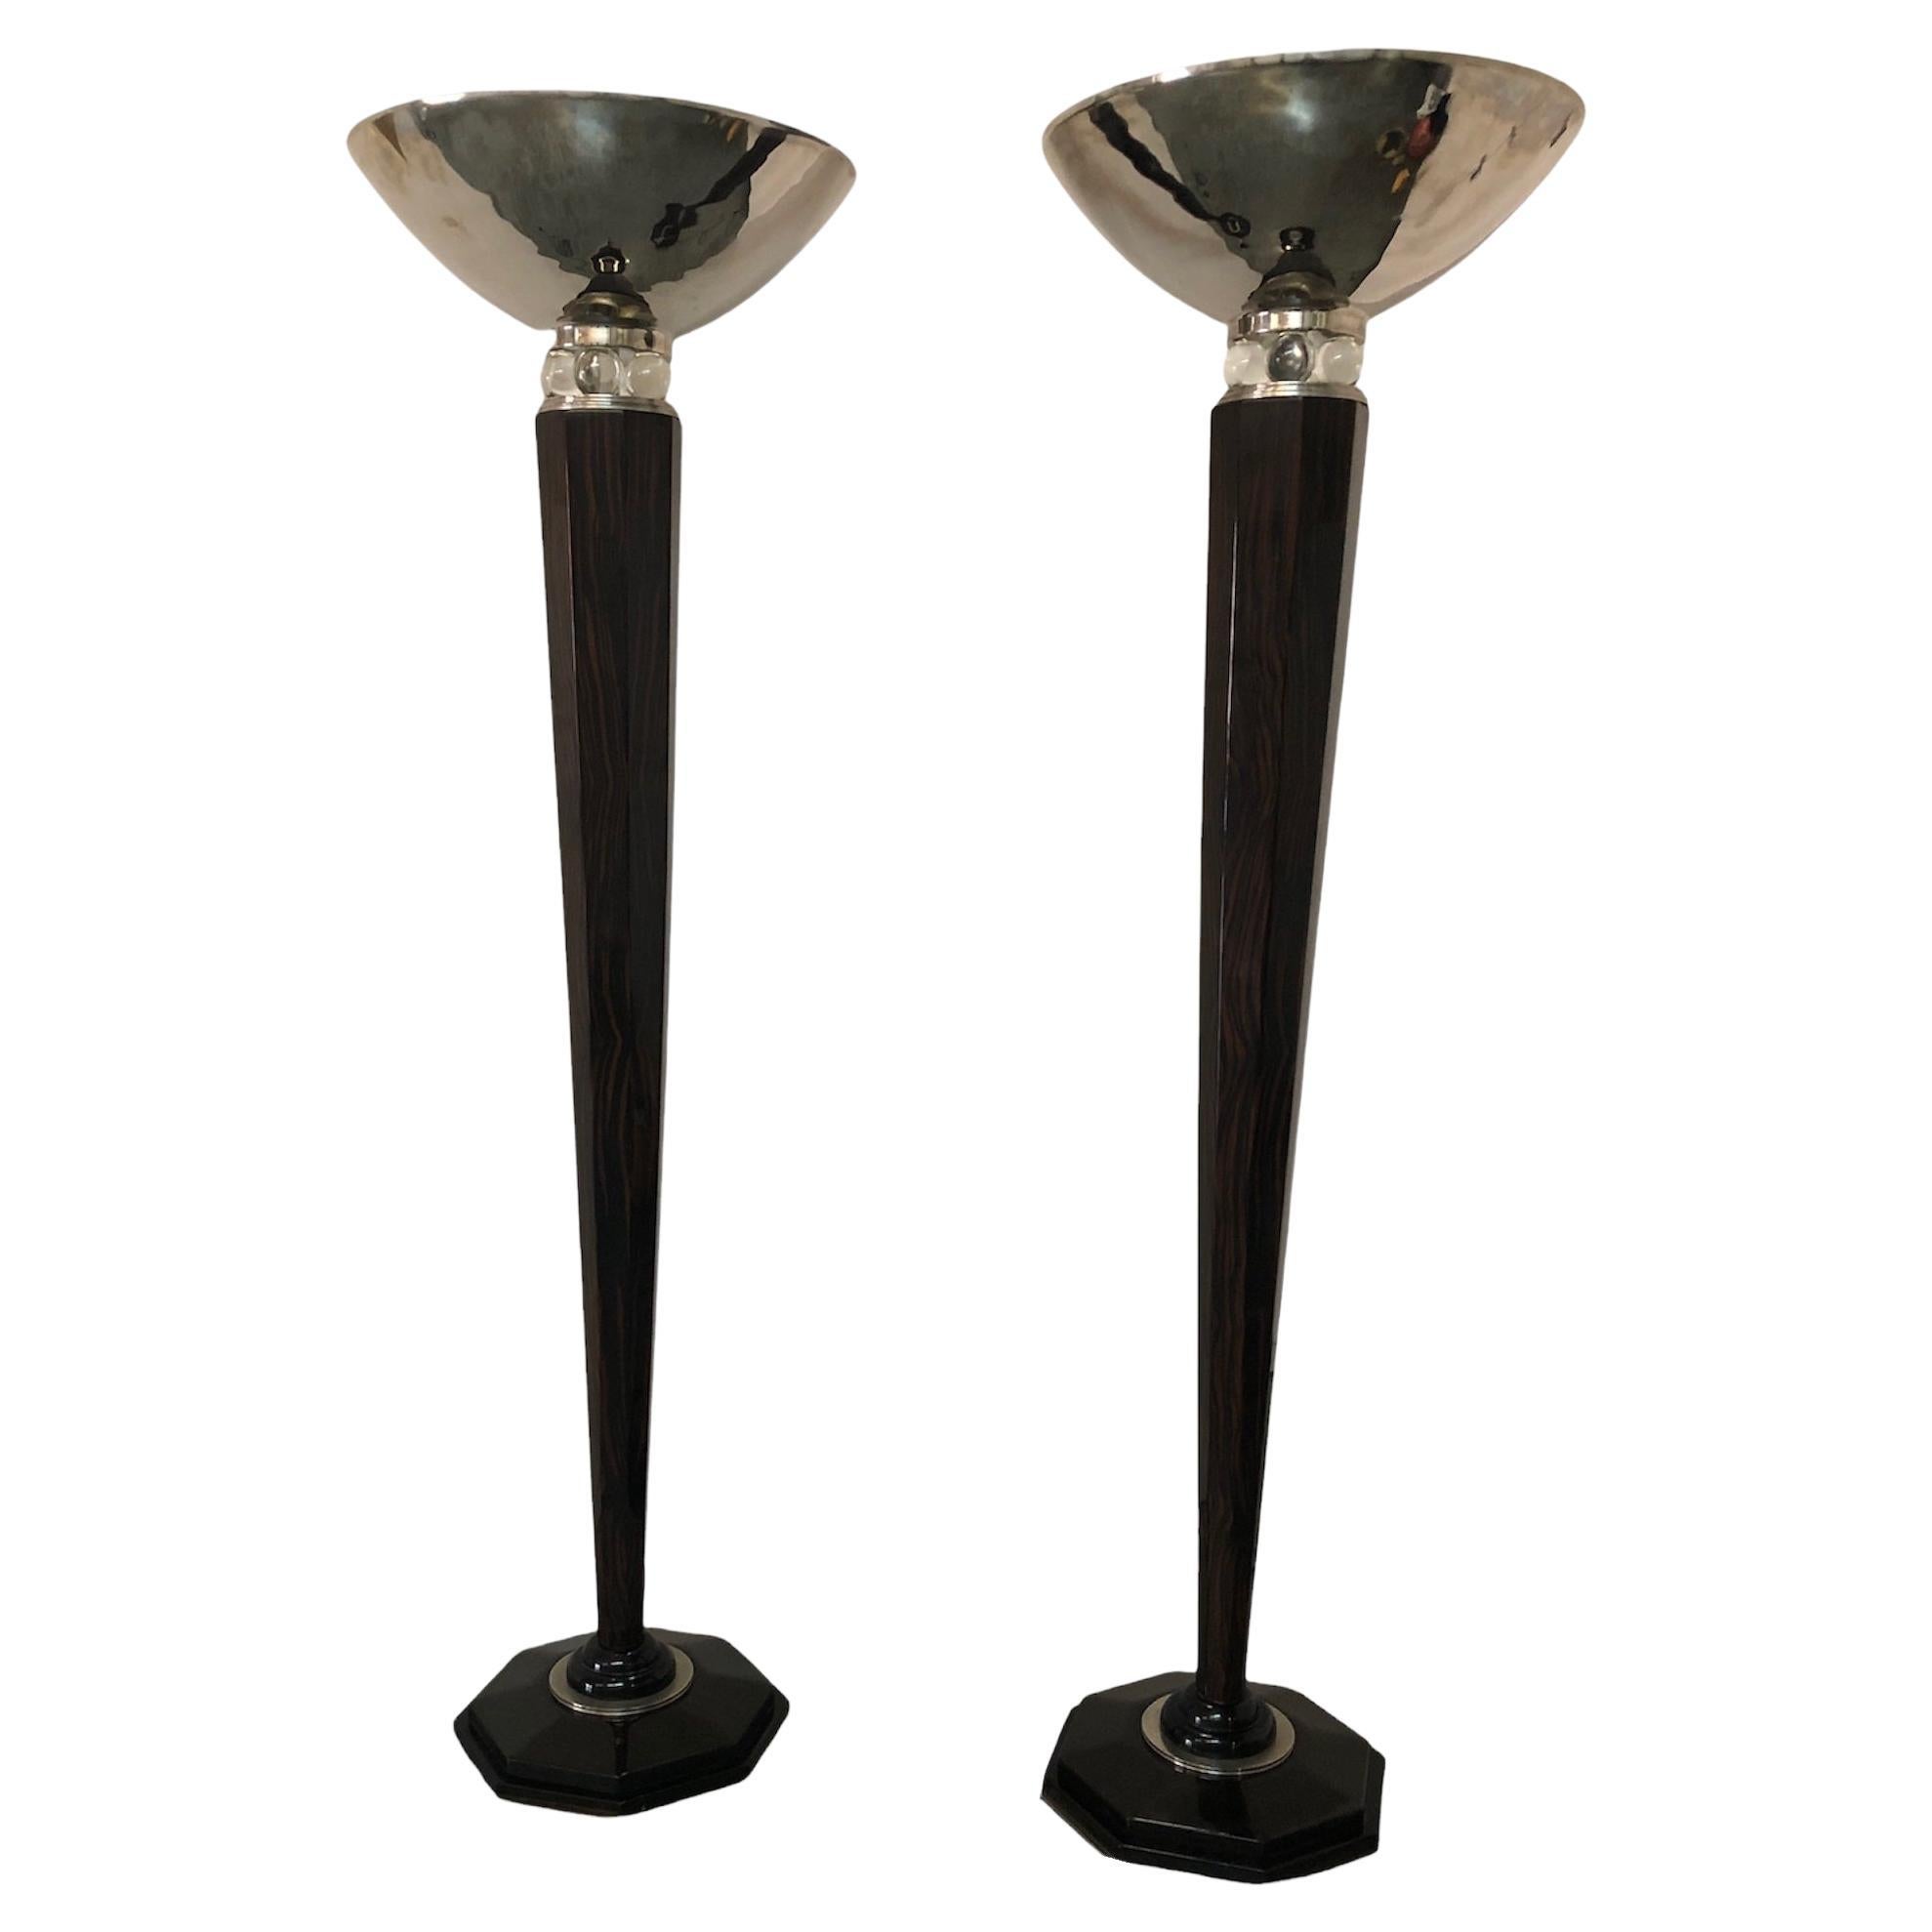 2 Art Deco Floor Lamps, France, Materials: glass, wood and Chrome, 1920